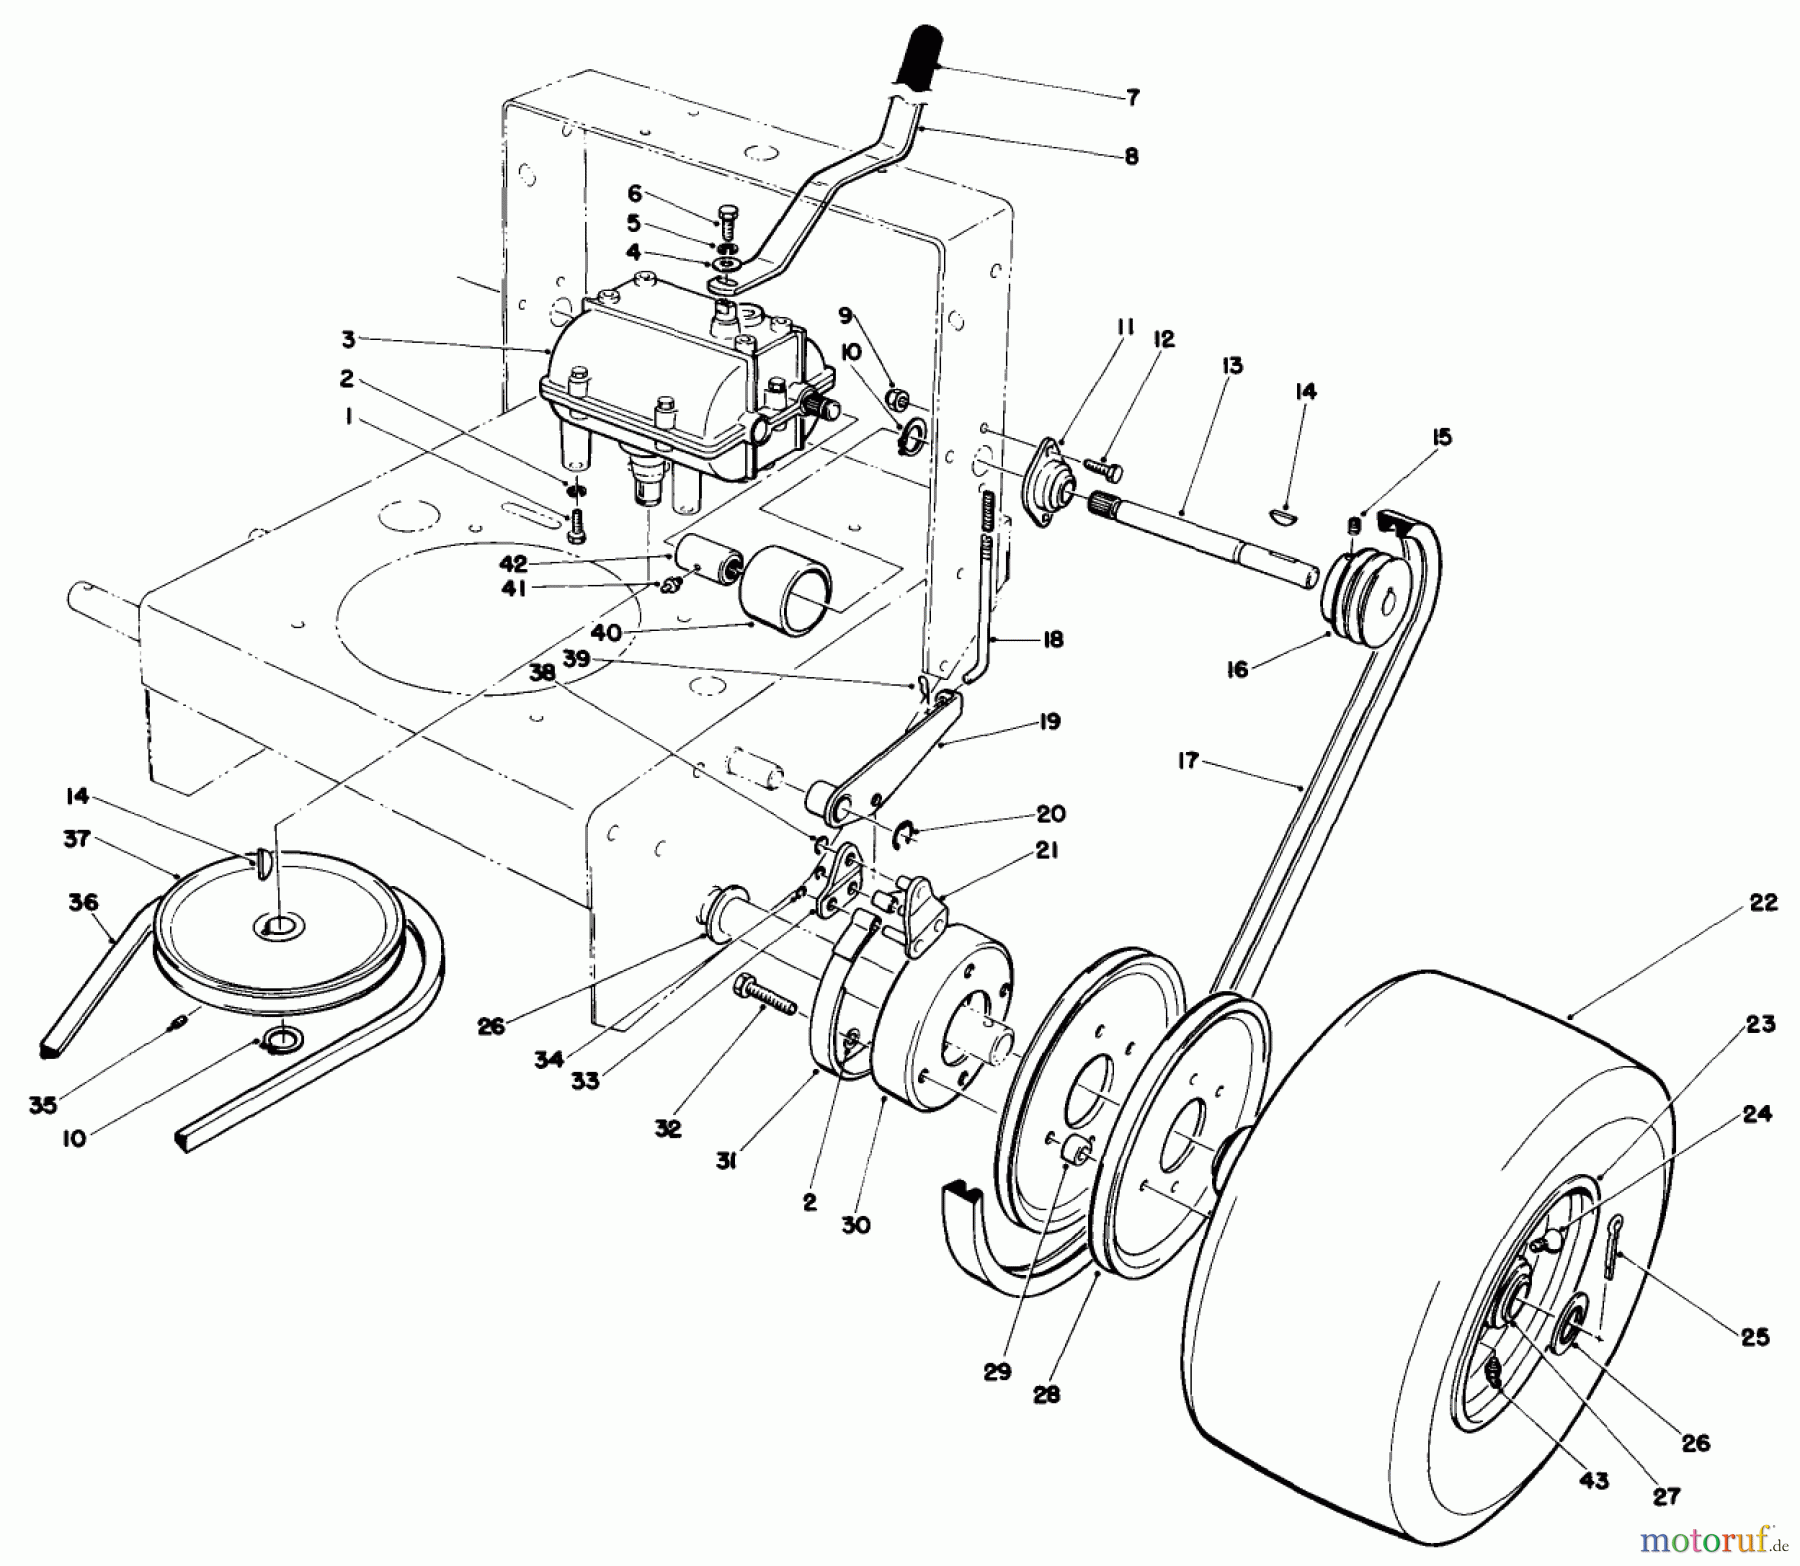  Toro Neu Mowers, Drive Unit Only 30111 - Toro Mid-Size Proline Gear Traction Unit, 11 hp, 1987 (7000001-7999999) AXLE ASSEMBLY